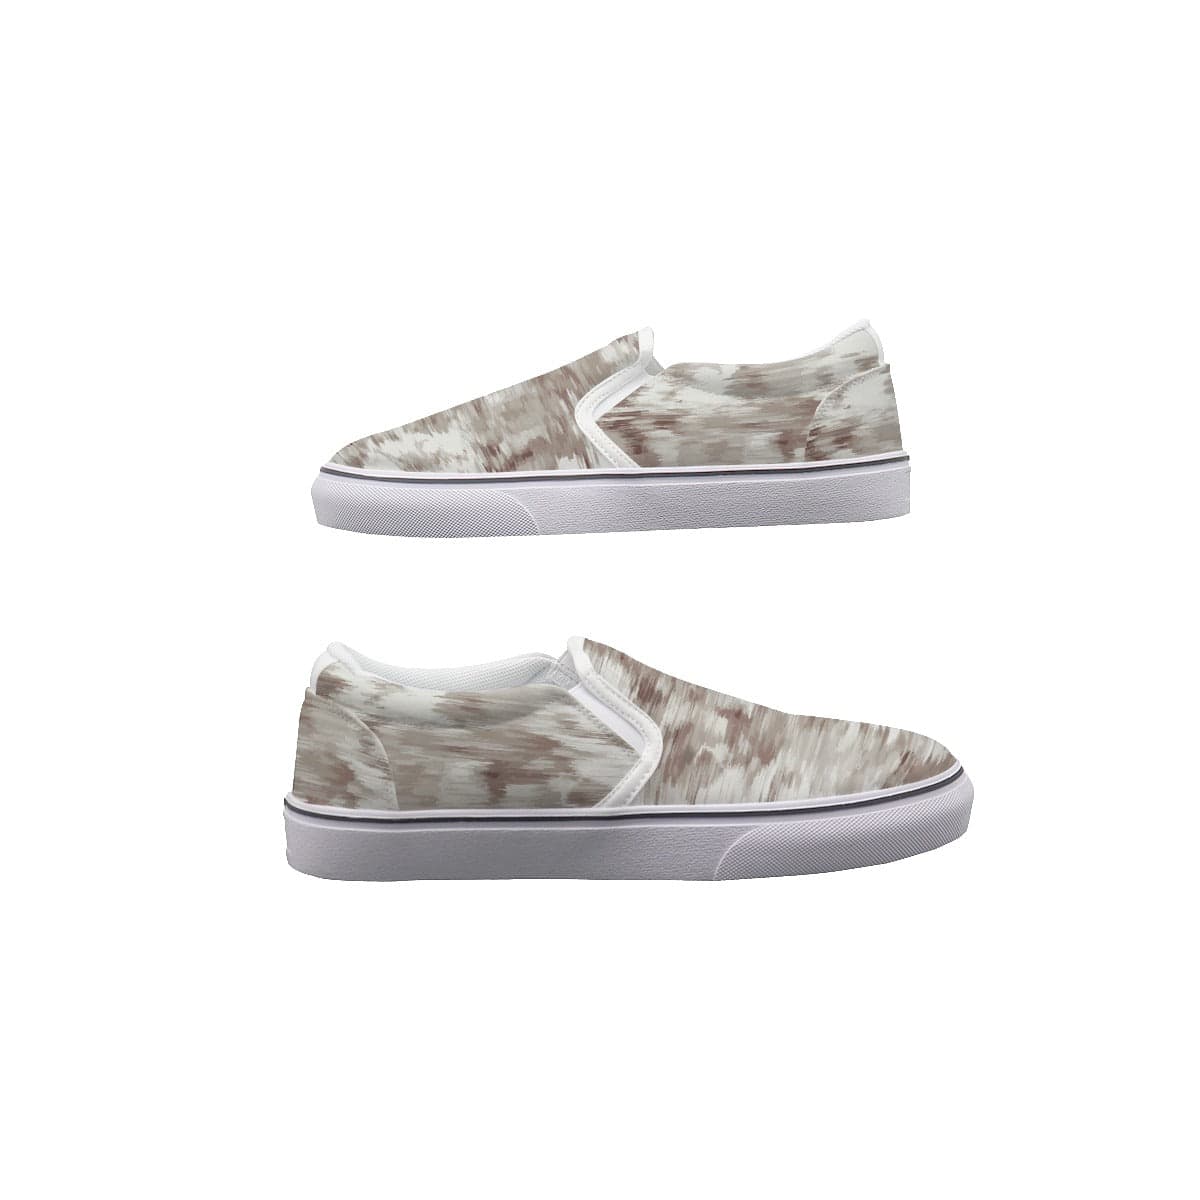 Yoycol Soft Sand Hues - Women's Slip On Sneakers